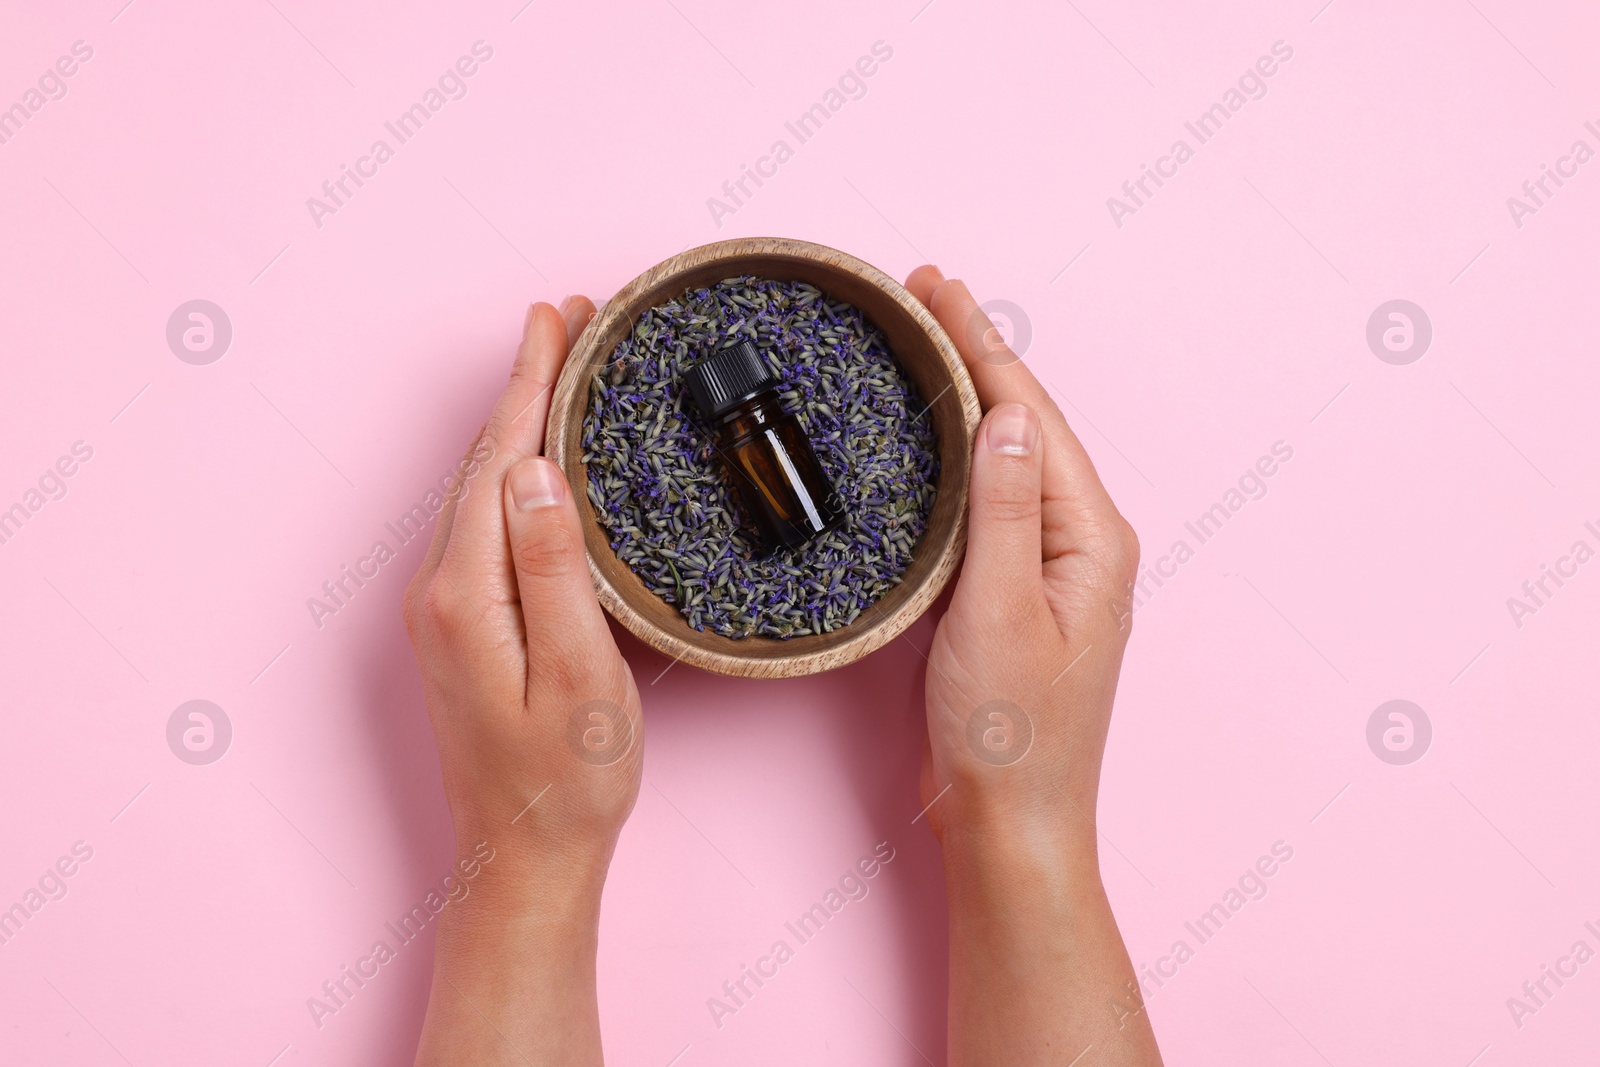 Photo of Woman holding bowl with lavender essential oil and flowers on pink background, top view